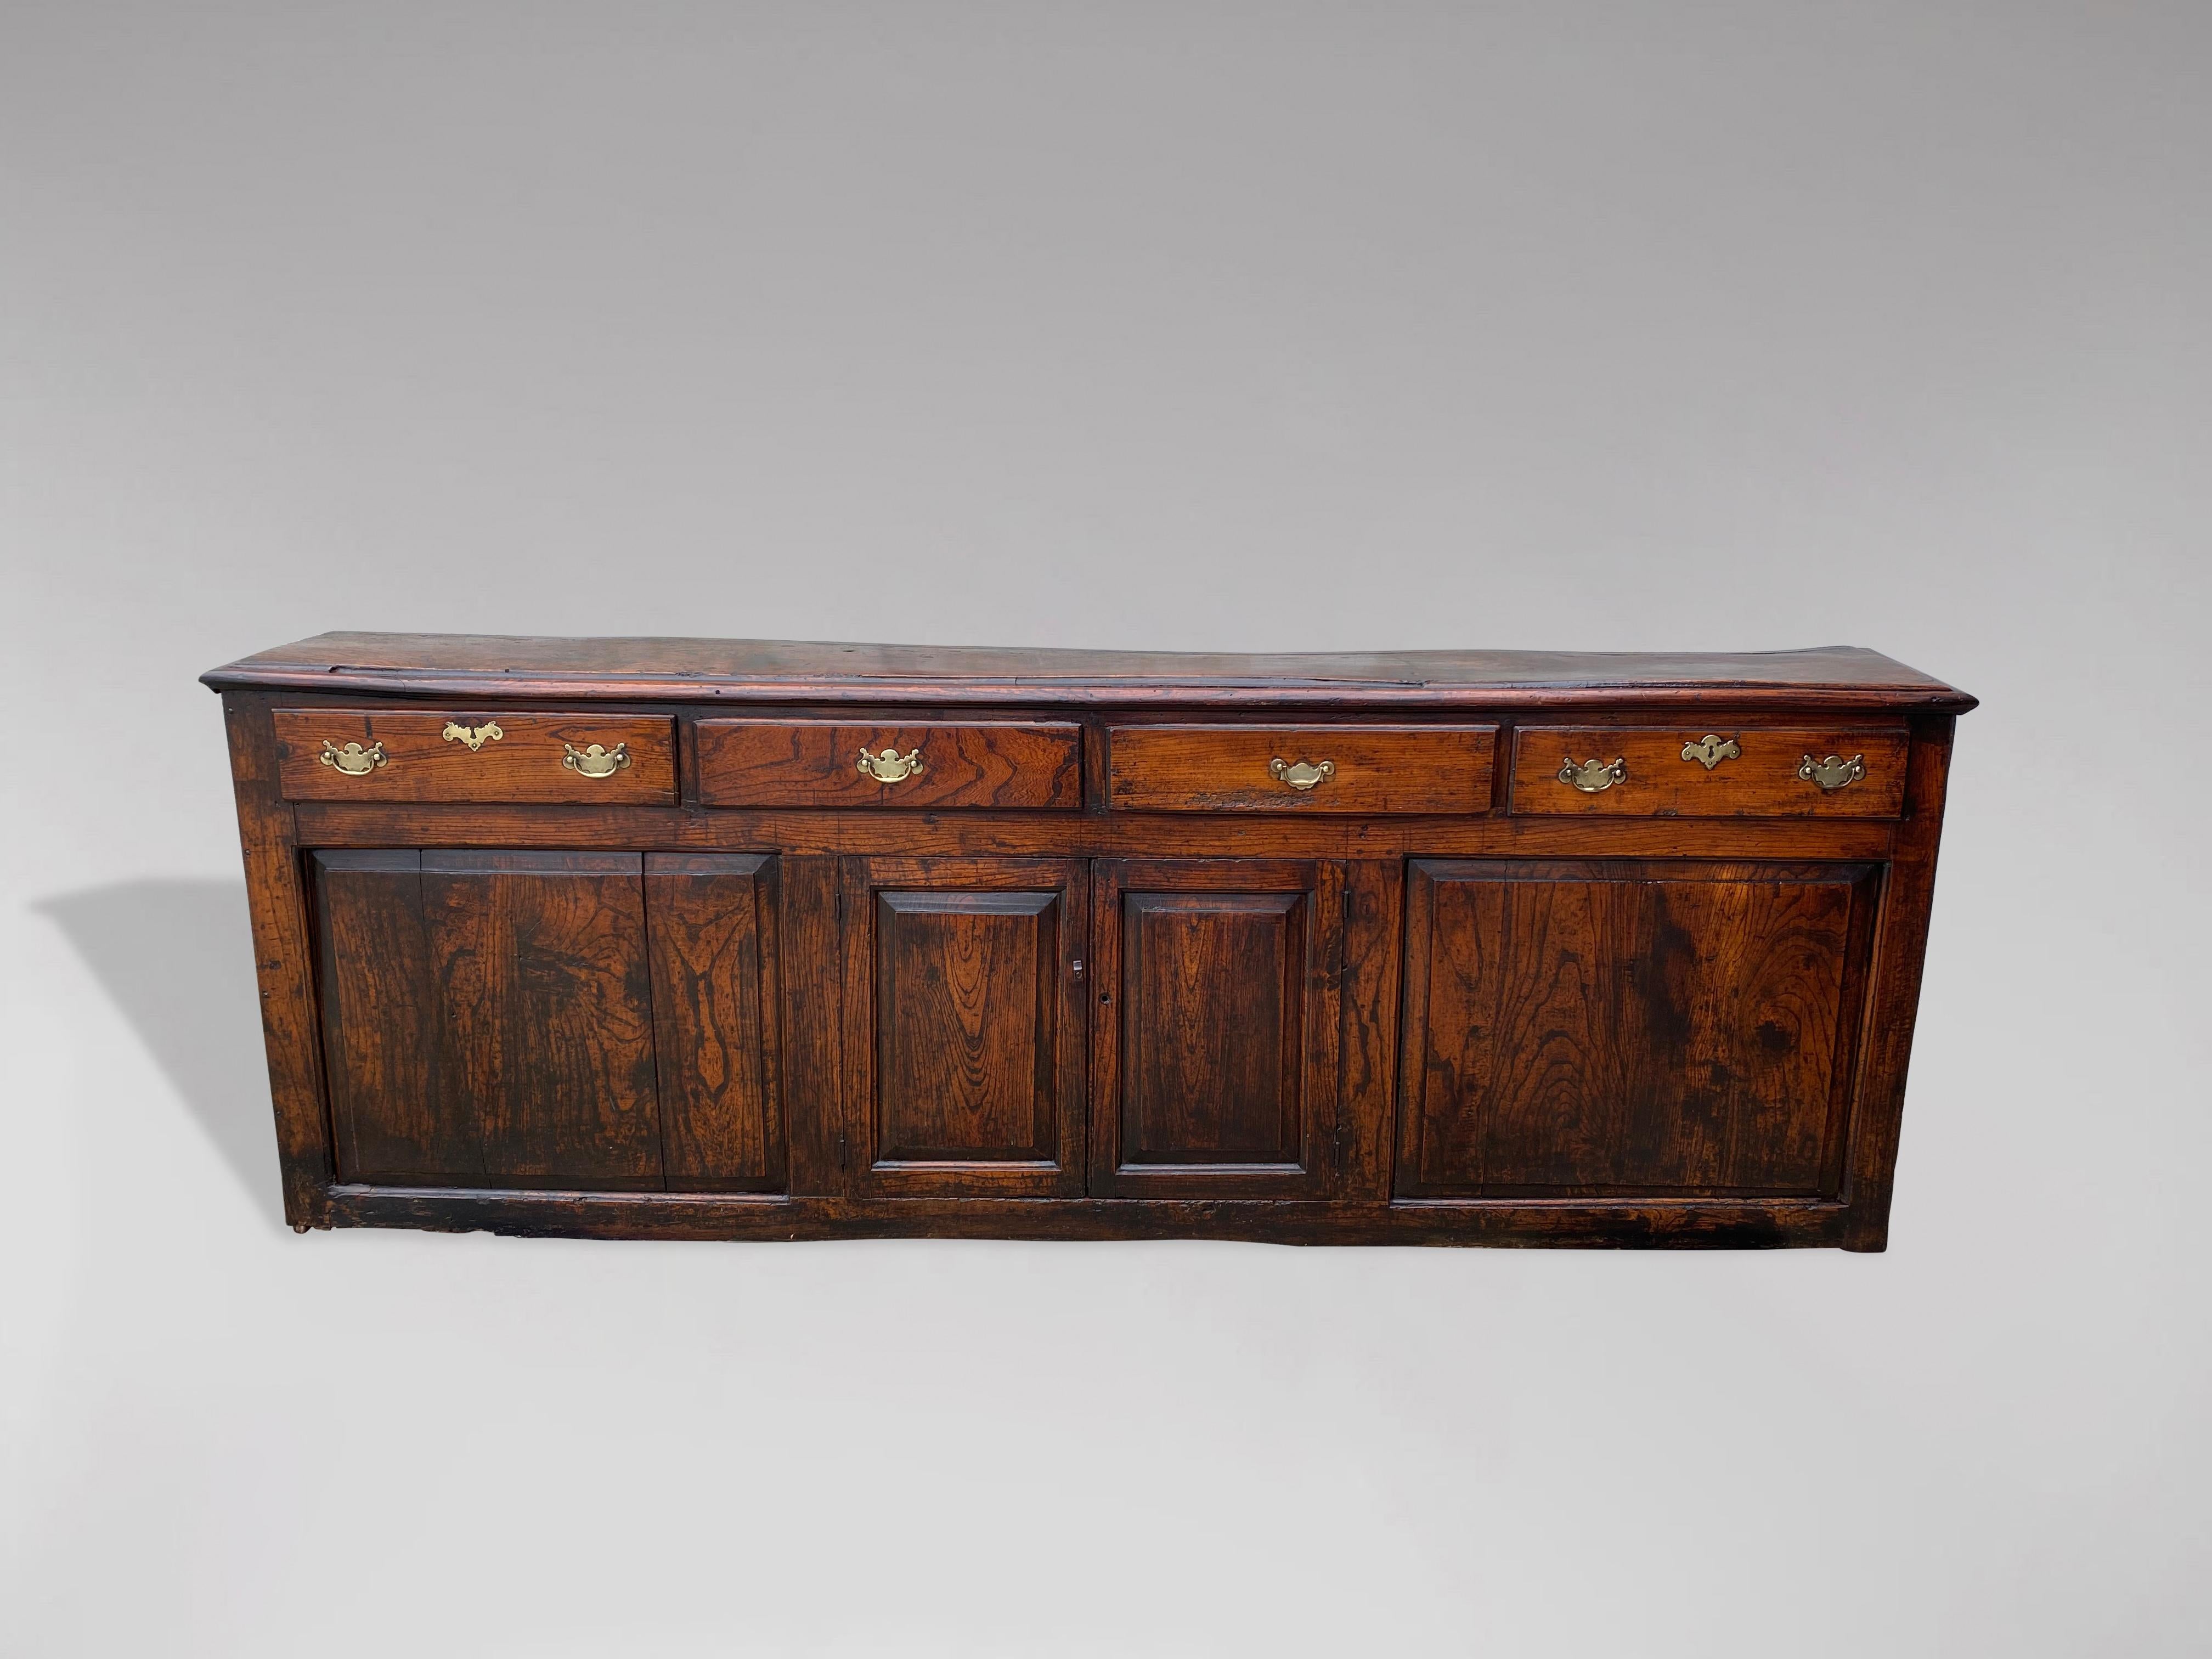 A stunning late 17th century narrow solid oak farmhouse dresser base. Rectangular moulded planked top above 4 drawers with brass handles, above a pair of doors, flanked by 2 large oak panels all standing on a plinth base. Warm rich colour and